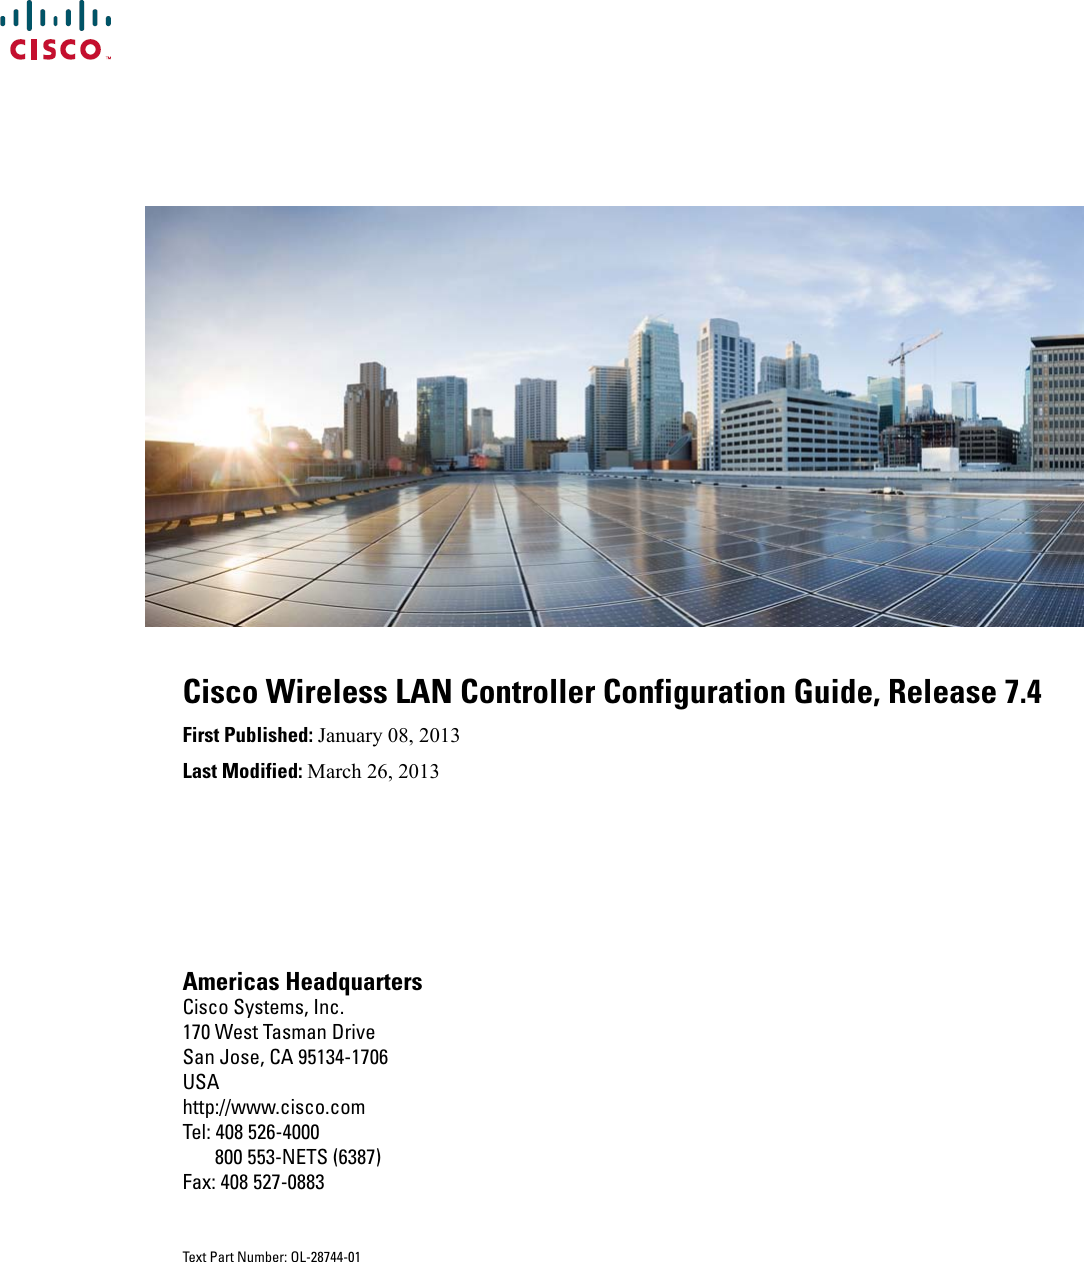 Cisco Wireless LAN Controller Configuration Guide, Release 7.4First Published: January 08, 2013Last Modified: March 26, 2013Americas HeadquartersCisco Systems, Inc.170 West Tasman DriveSan Jose, CA 95134-1706USAhttp://www.cisco.comTel: 408 526-4000       800 553-NETS (6387)Fax: 408 527-0883Text Part Number: OL-28744-01